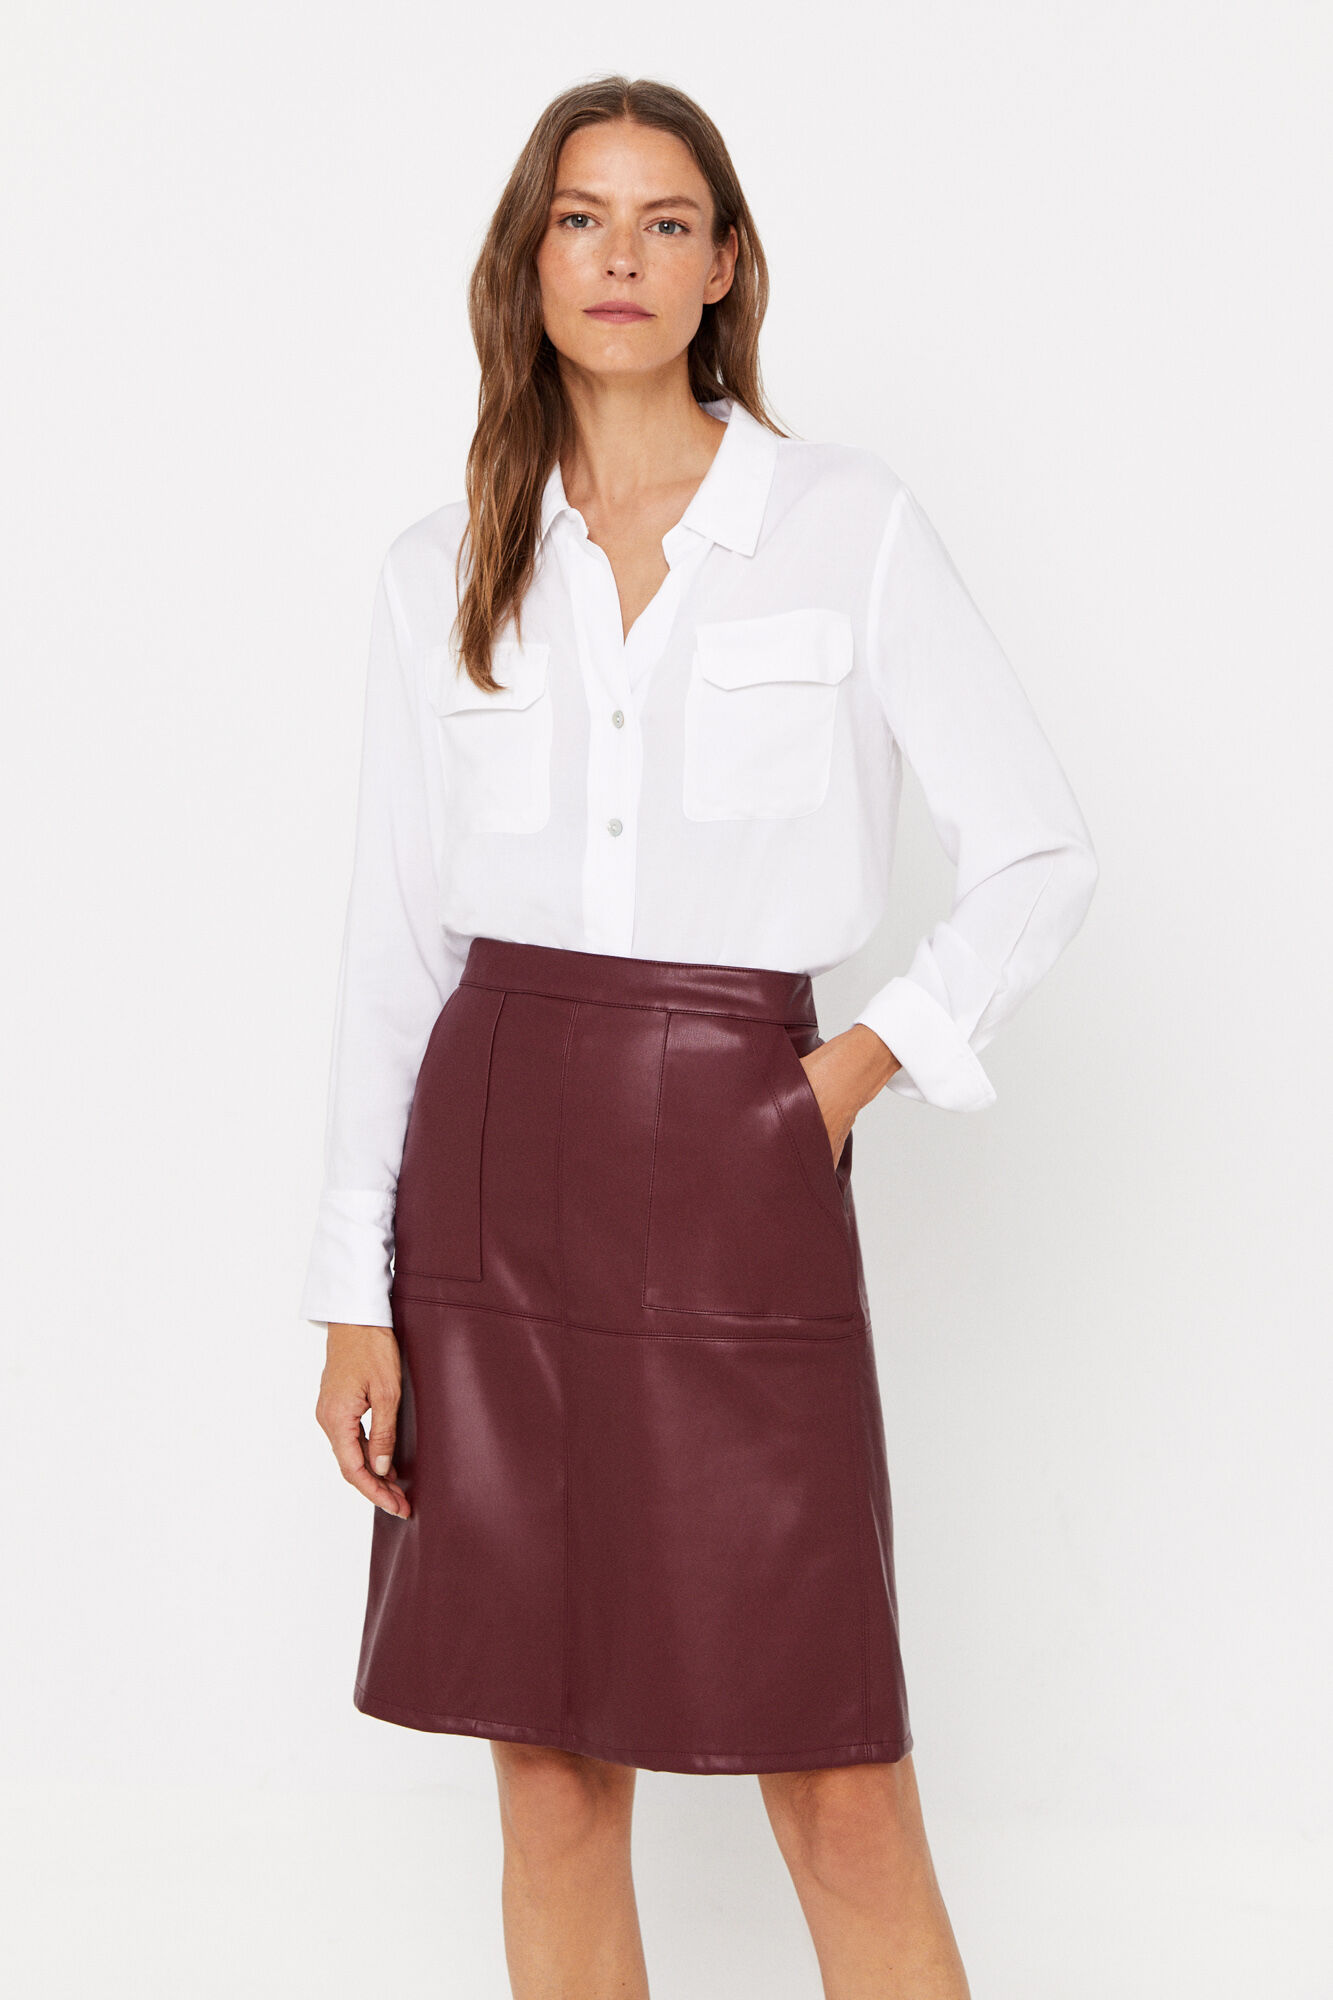 Here For It Faux Leather Mini Skirt - Burgundy - ShopperBoard